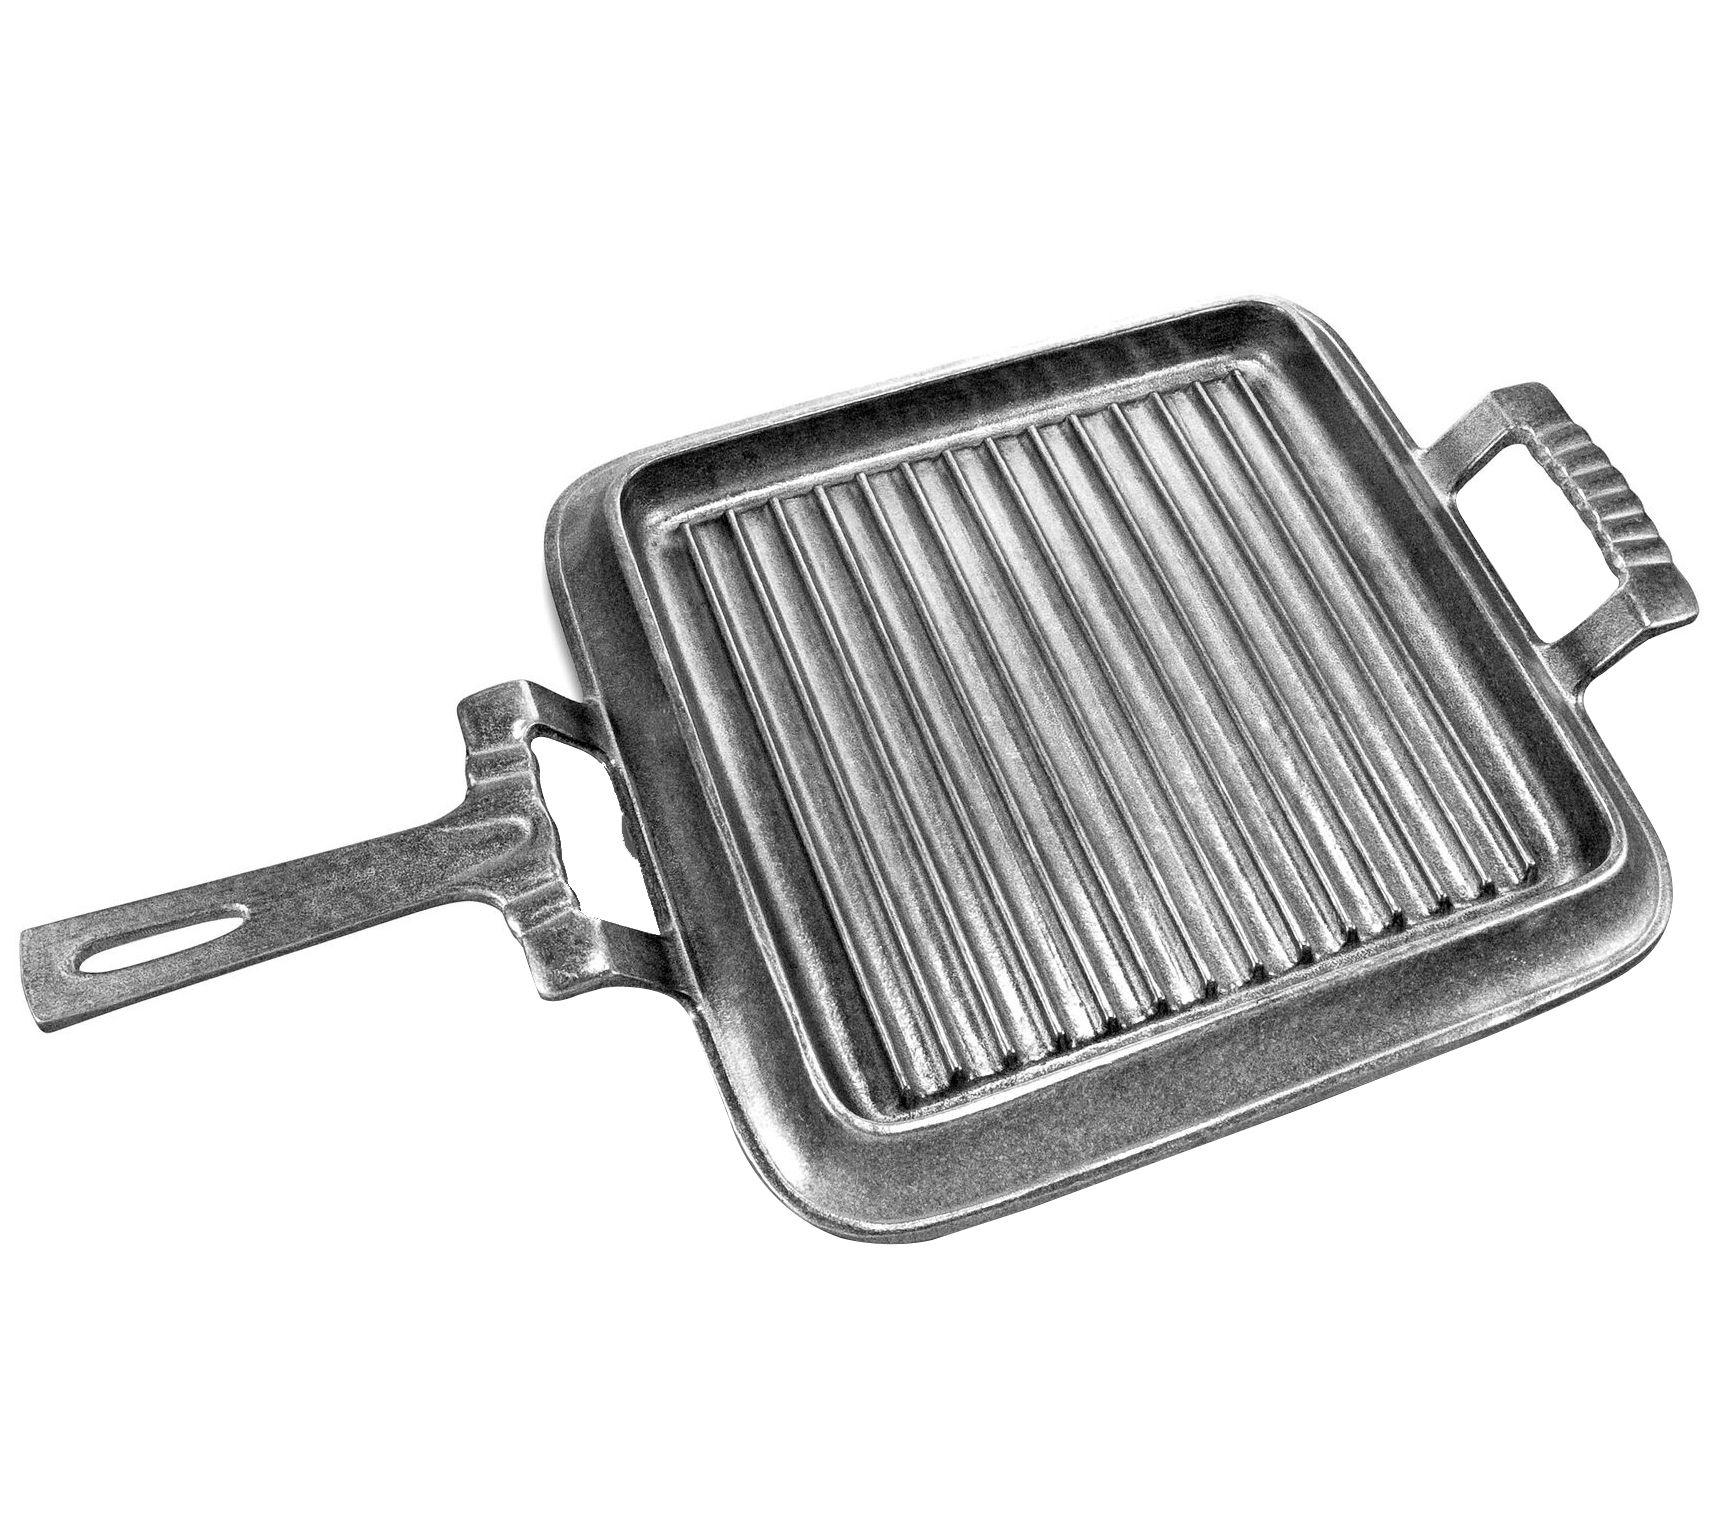 Chef Collection Square Grill Pan | Lodge Cast Iron